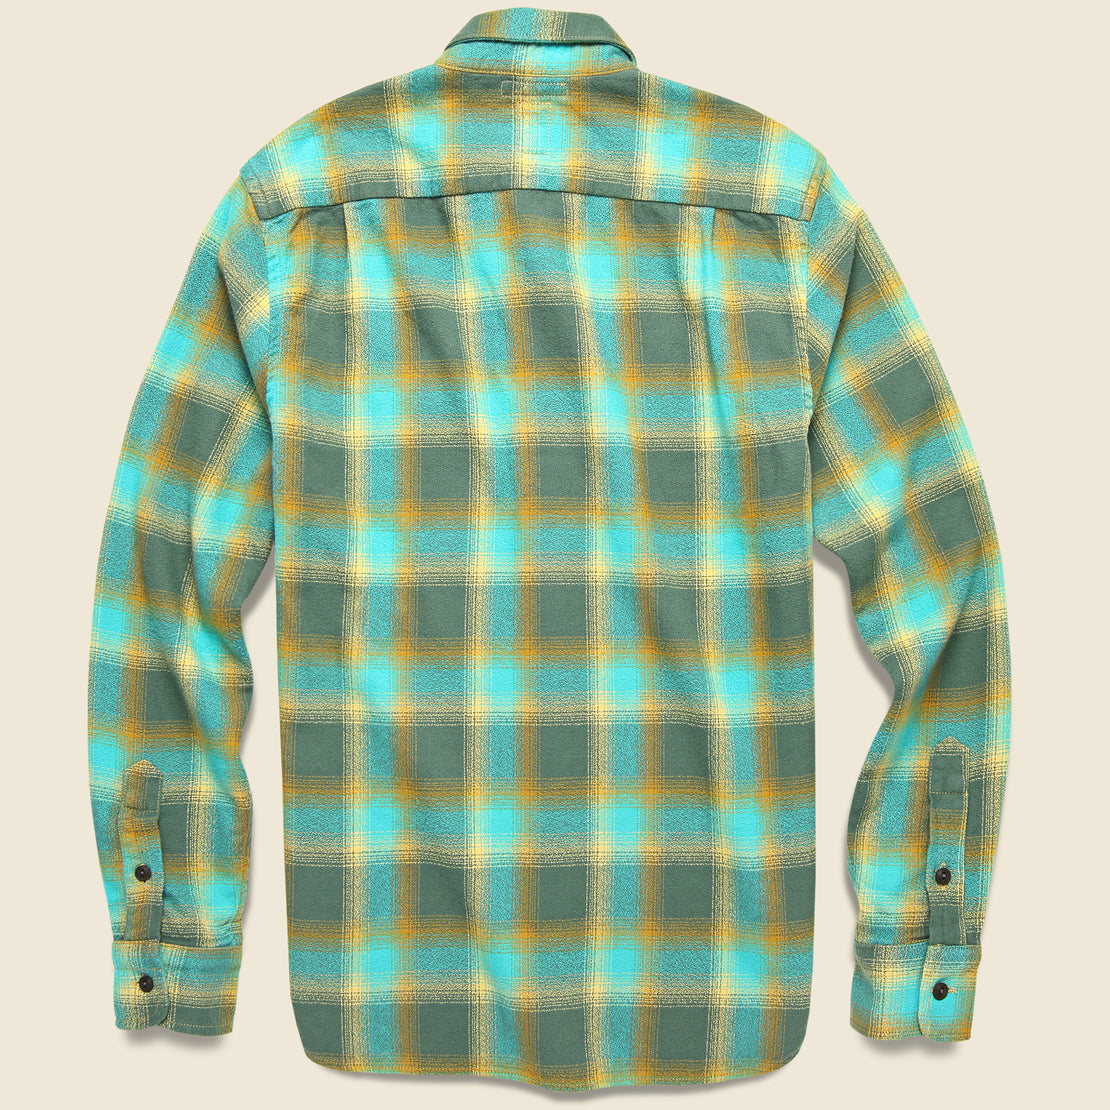 Ripper Flannel - Green Vintage Plaid - KATO - STAG Provisions - Tops - L/S Woven - Plaid